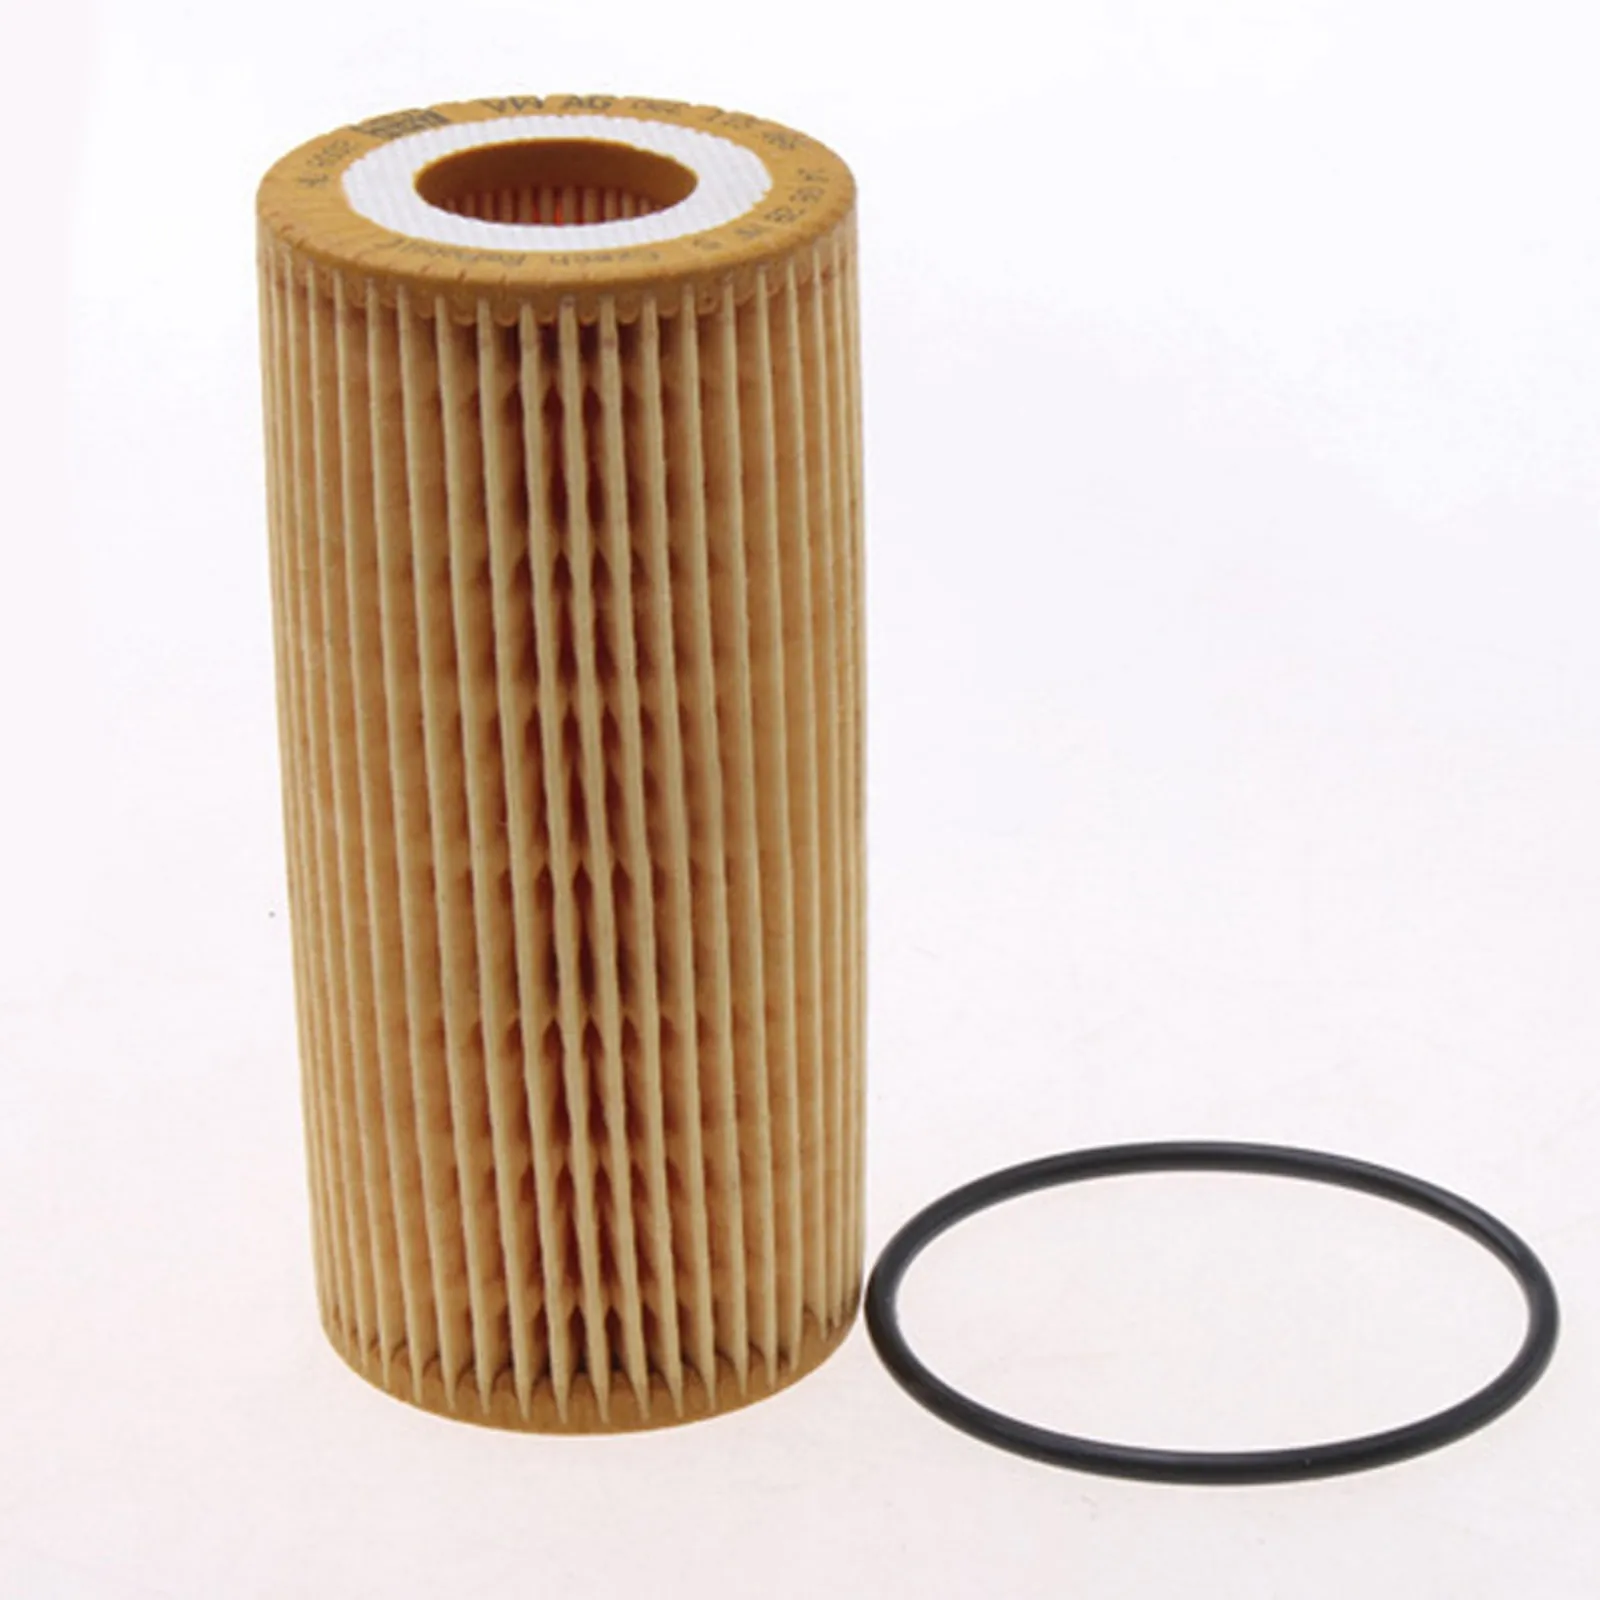 

Filter Kit Keep Your For Volvo Running Smoothly with 8692305 Engine Oil Filter for C30 C70 S40 S60 V50 V60 XC60 XC70